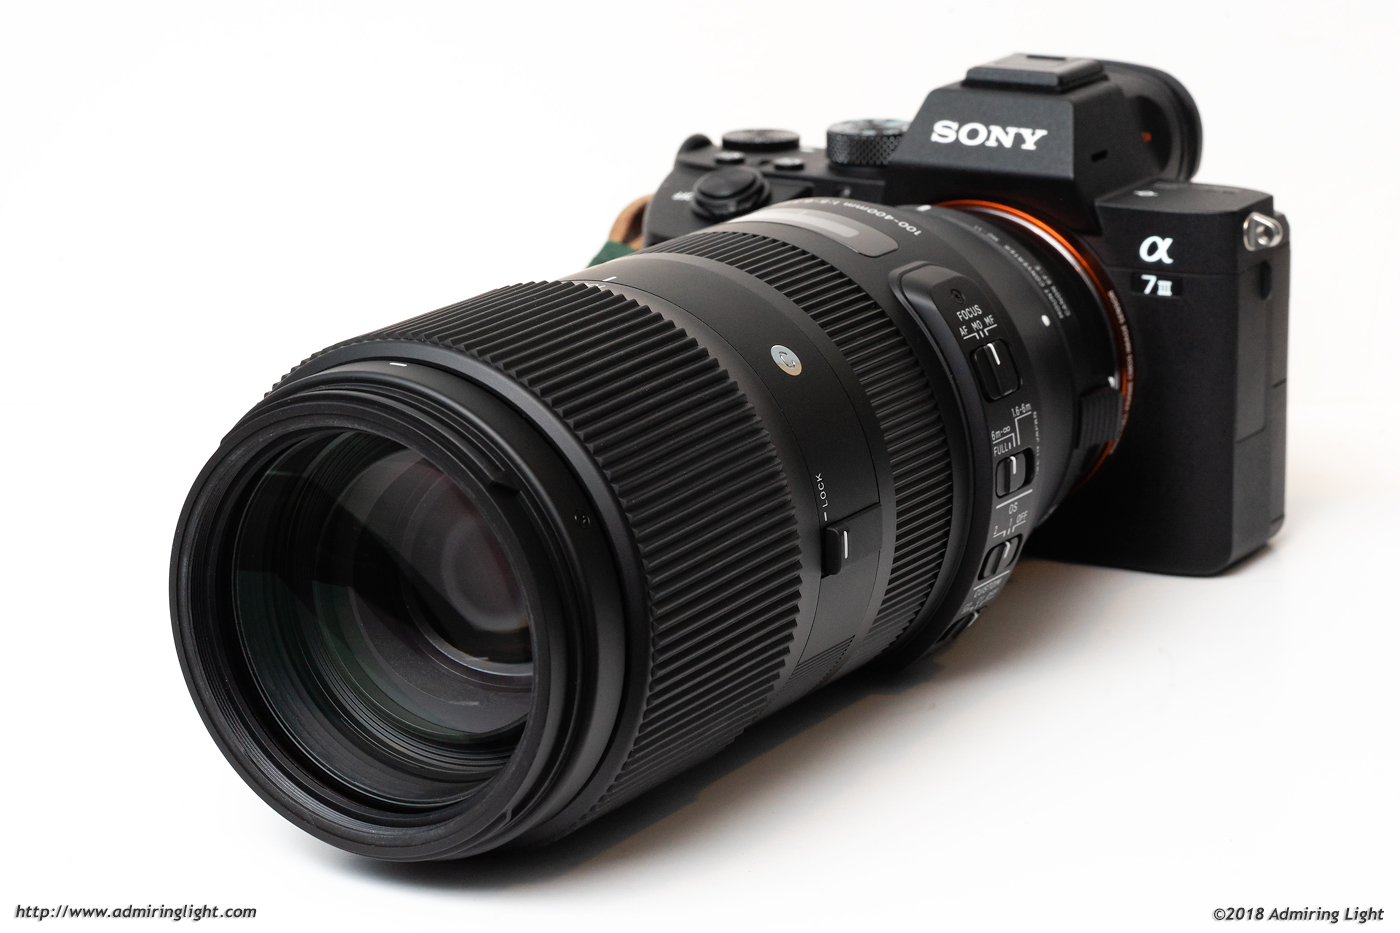 Review: Sigma 100-400mm f/5-6.3 DG OS HSM (Canon EF Mount) + MC-11 